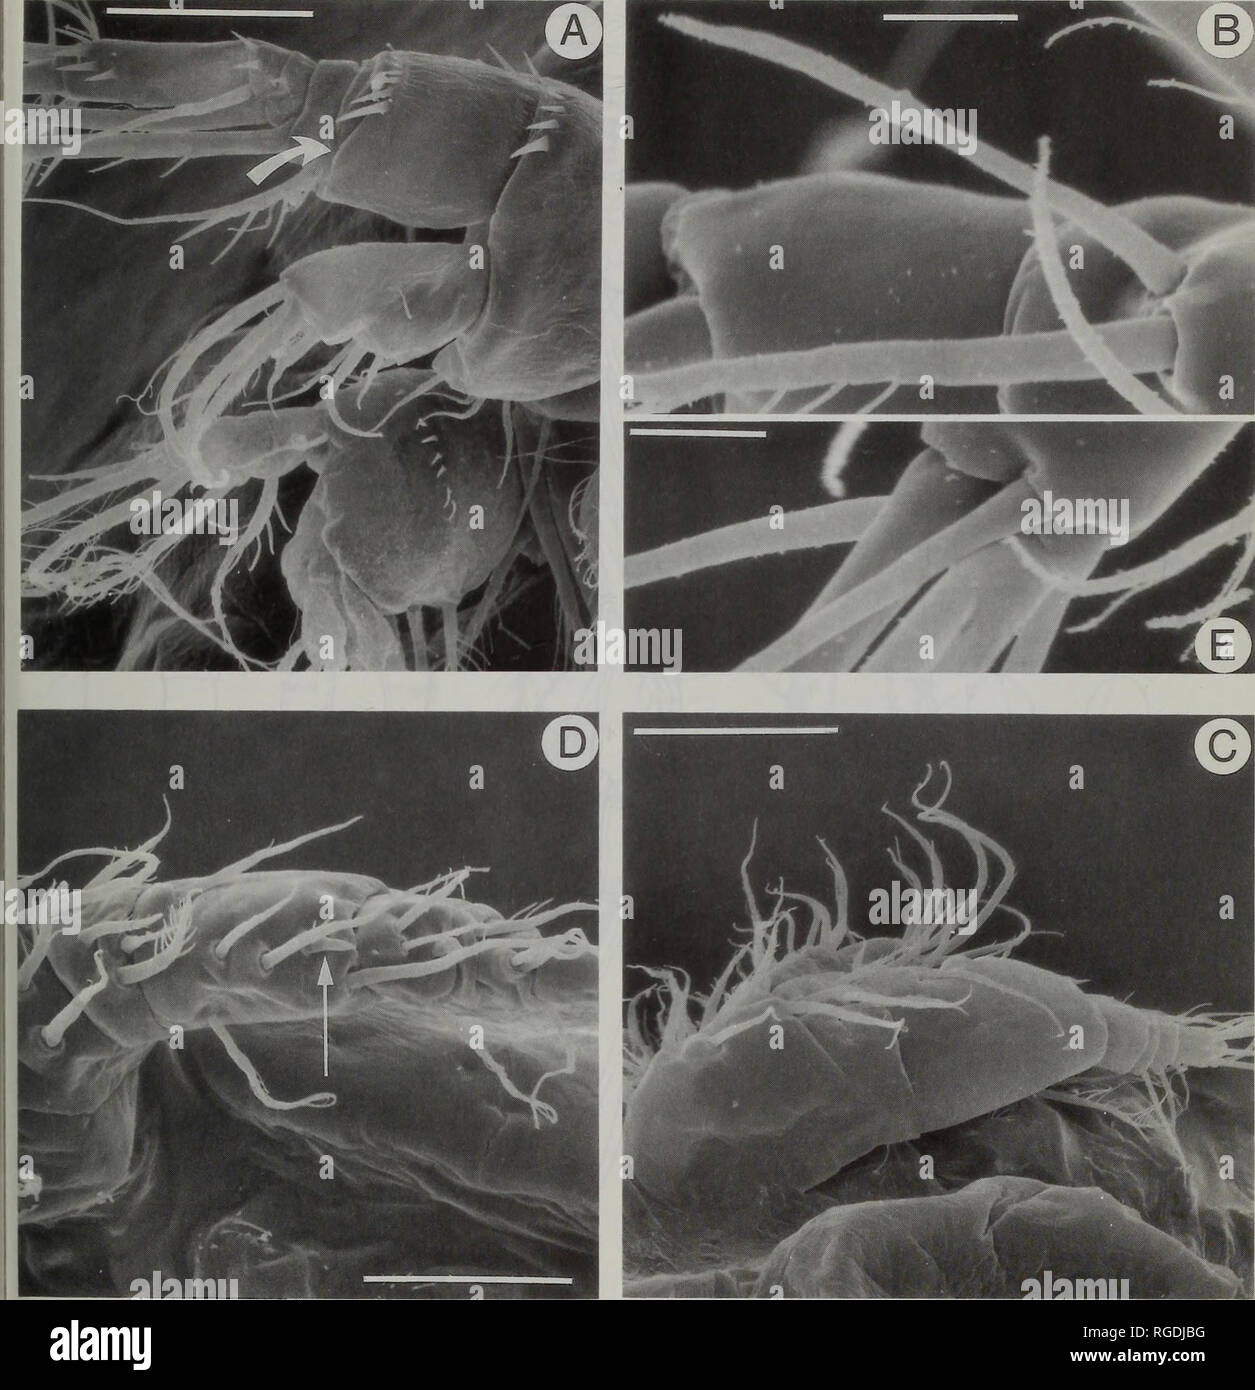 . Bulletin of the Natural History Museum Zoology. LIFE CYCLE OF PARACYCLOPS 59. Fig. 16 Scanning electron micrographs of P. fimbriatus. A, Nauplius VI antenna, ventral; arrow indicates minute second exopodal segment; B, Adult female antennule, aesthetasc on segment 5; C, Male copepodid V antennule, dorsal; D, Male copepodid IV antennule, ventral; arrow indi- cates the spine on segment 4; E, Adult female antennule, double fusion on terminal segment, lateral. Scale bars A = 20 um, B = 5um, C = 40 urn, D = 25 um, E = 5 um. aesthetasc, 2, 3, 7 + 1 aesthetasc. Second endopodal segment of antenna (F Stock Photo